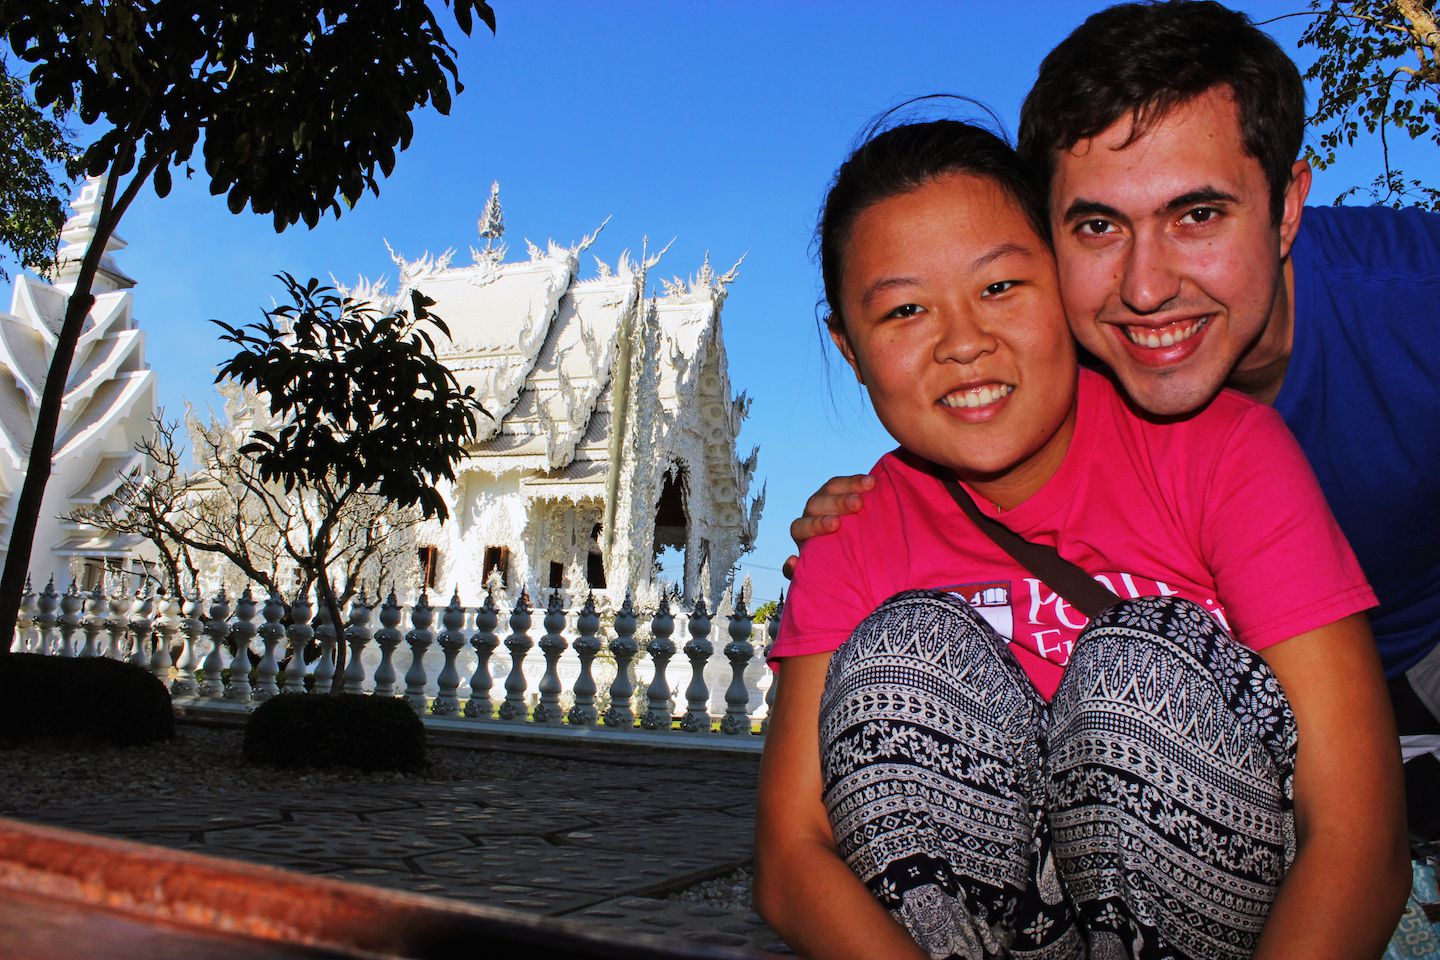 Julie and Carlos at the White Temple in Chiang Rai